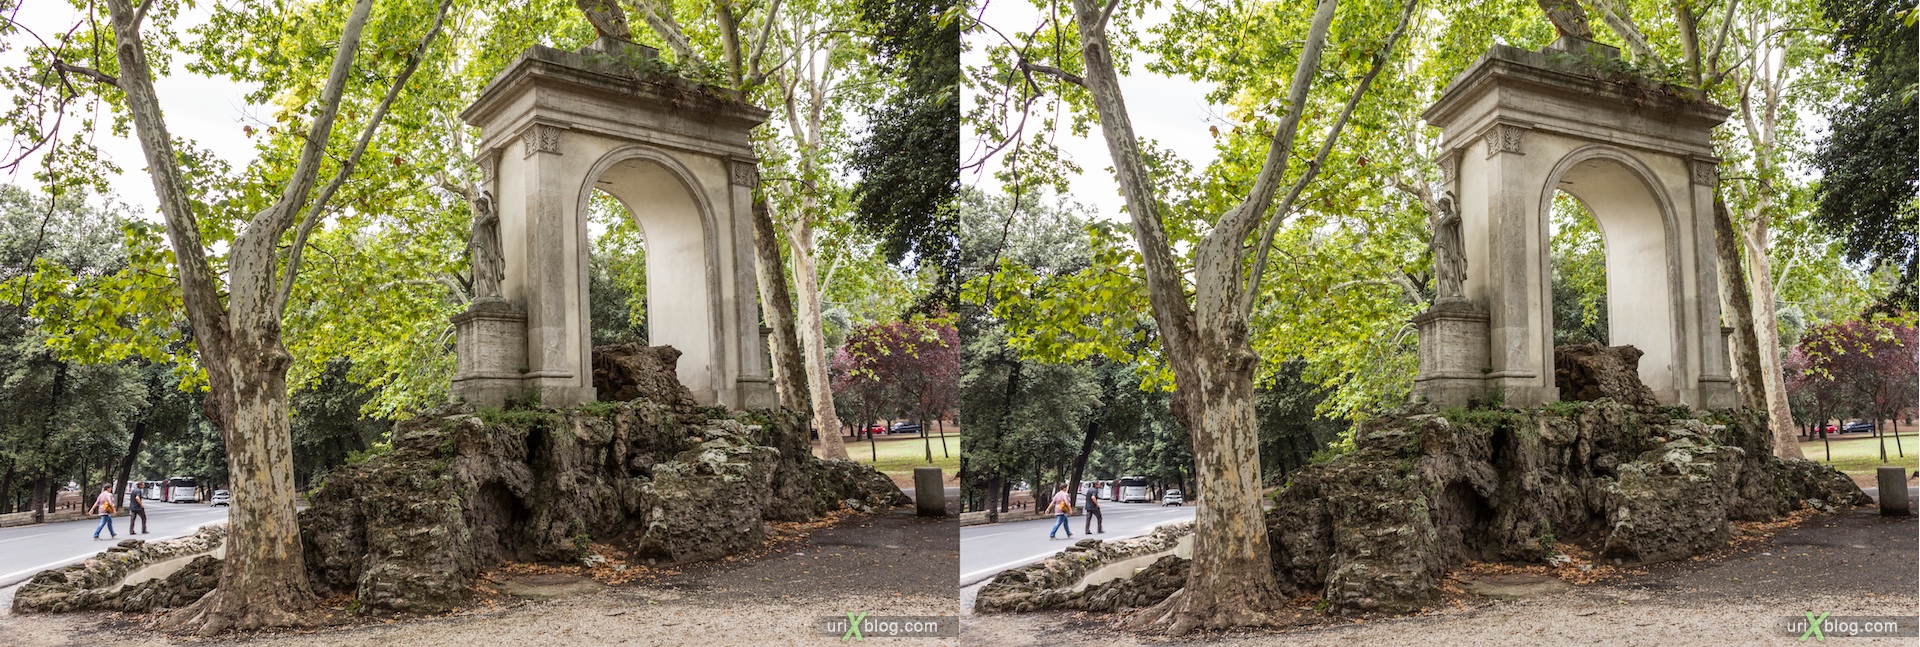 2012, fountain, park villa Borghese, Rome, Italy, 3D, stereo pair, cross-eyed, crossview, cross view stereo pair